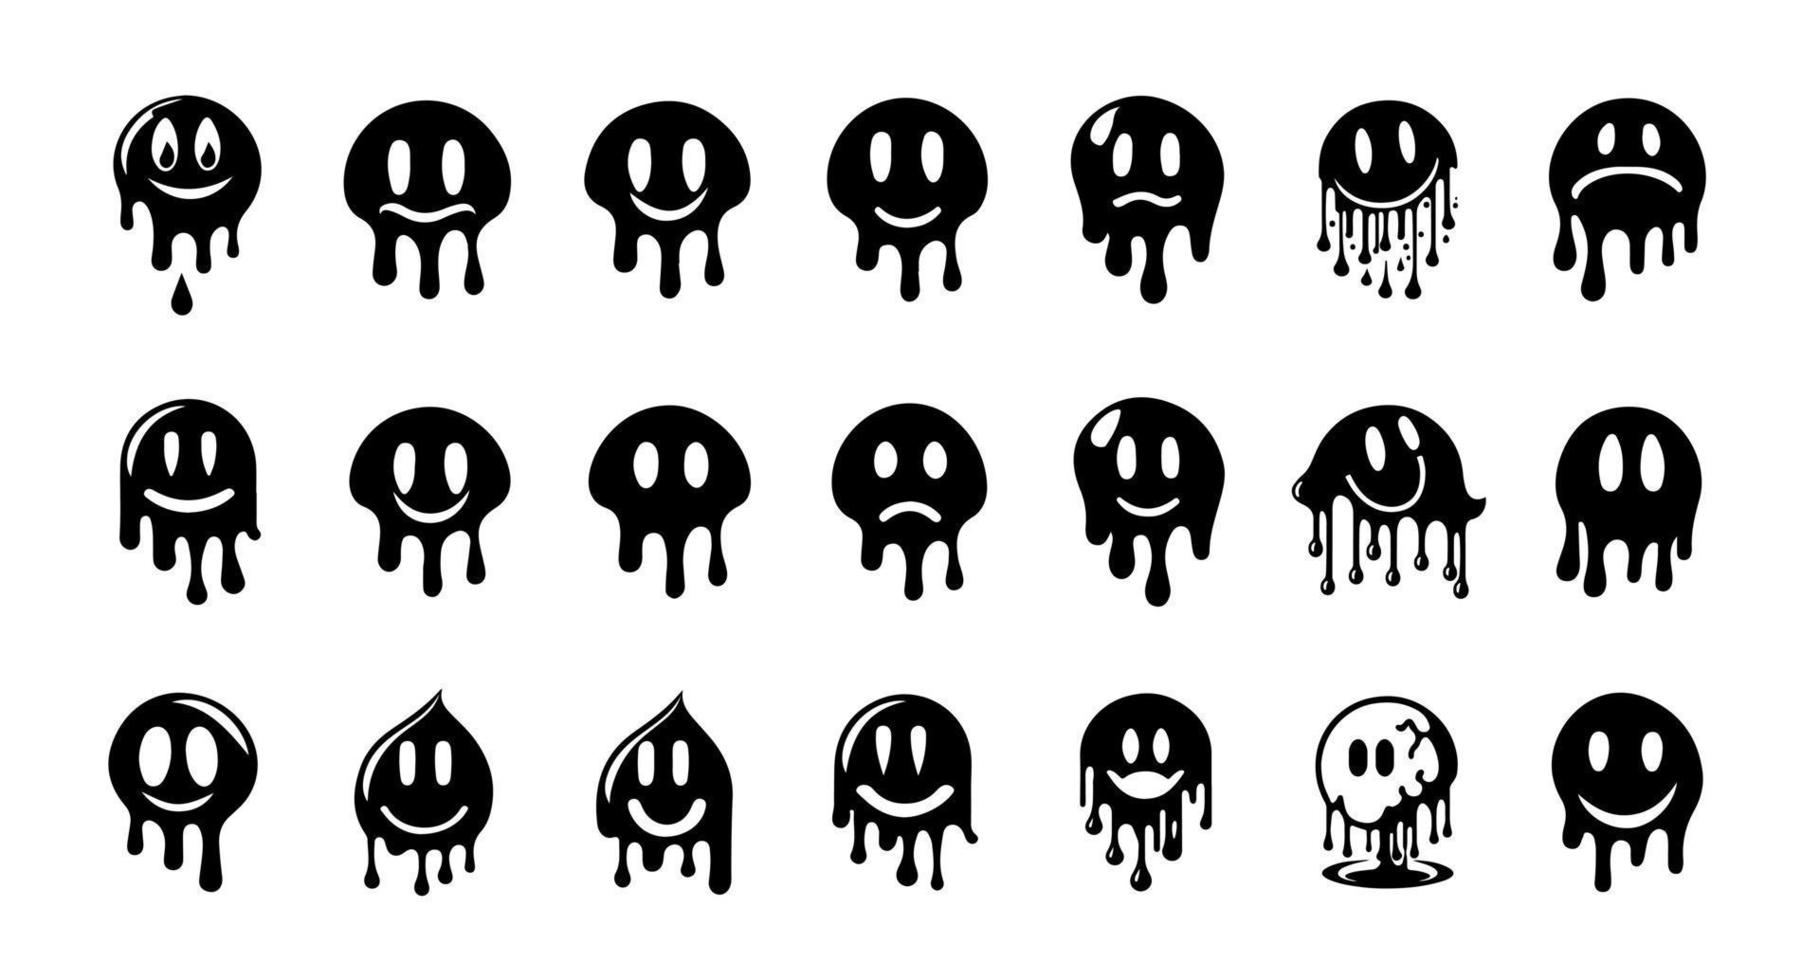 Hand drawn melting smiley faces silhouette set doodle drawings funny melted smile faces happy smiling character cartoon illustration vector